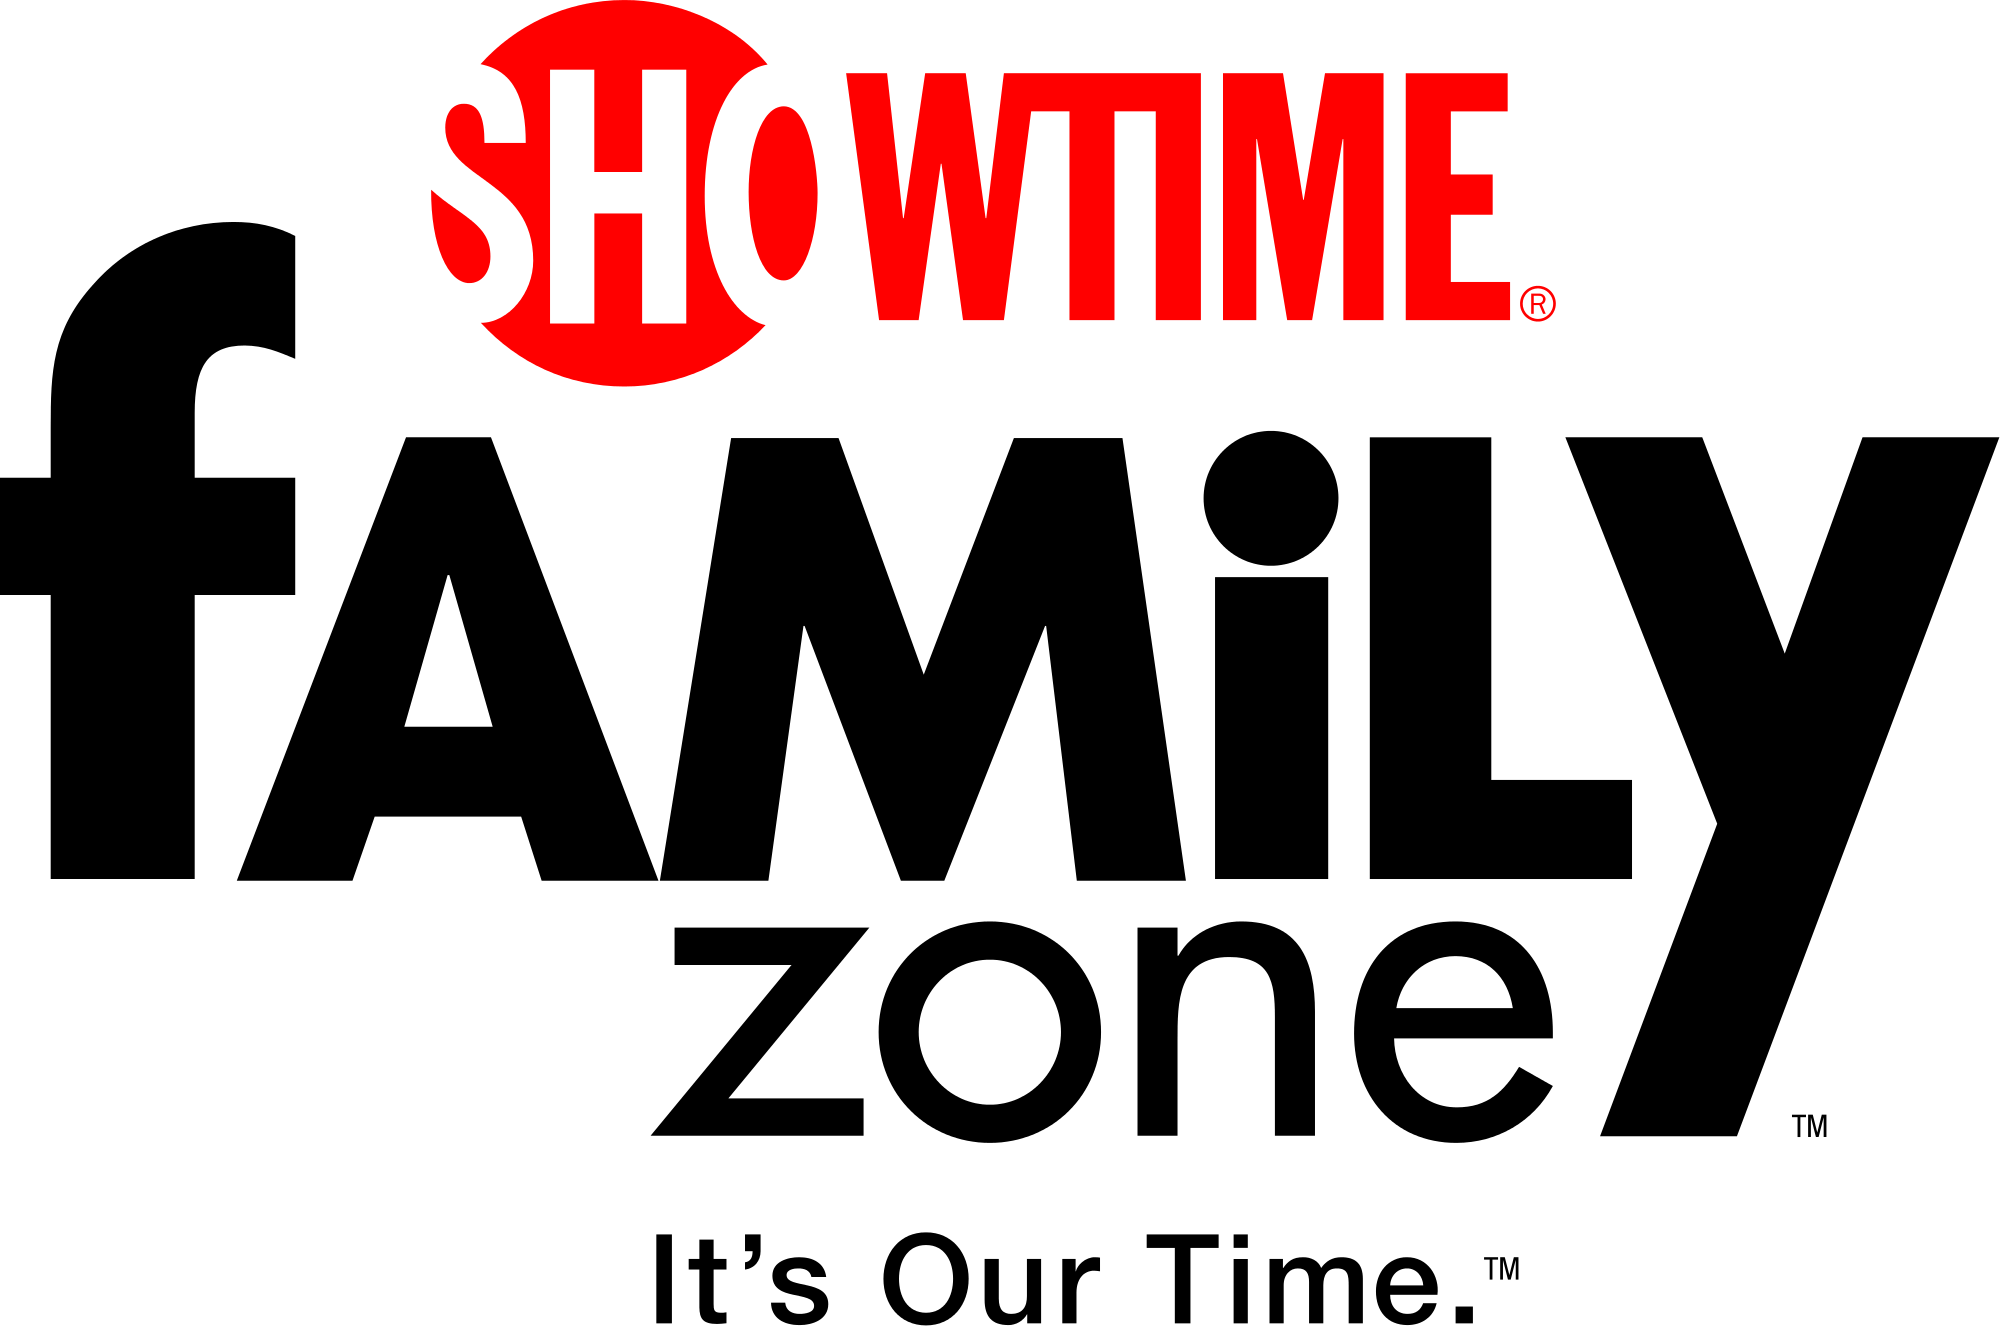 Showtime Logo - File:Showtime Family Zone.svg - Wikimedia Commons